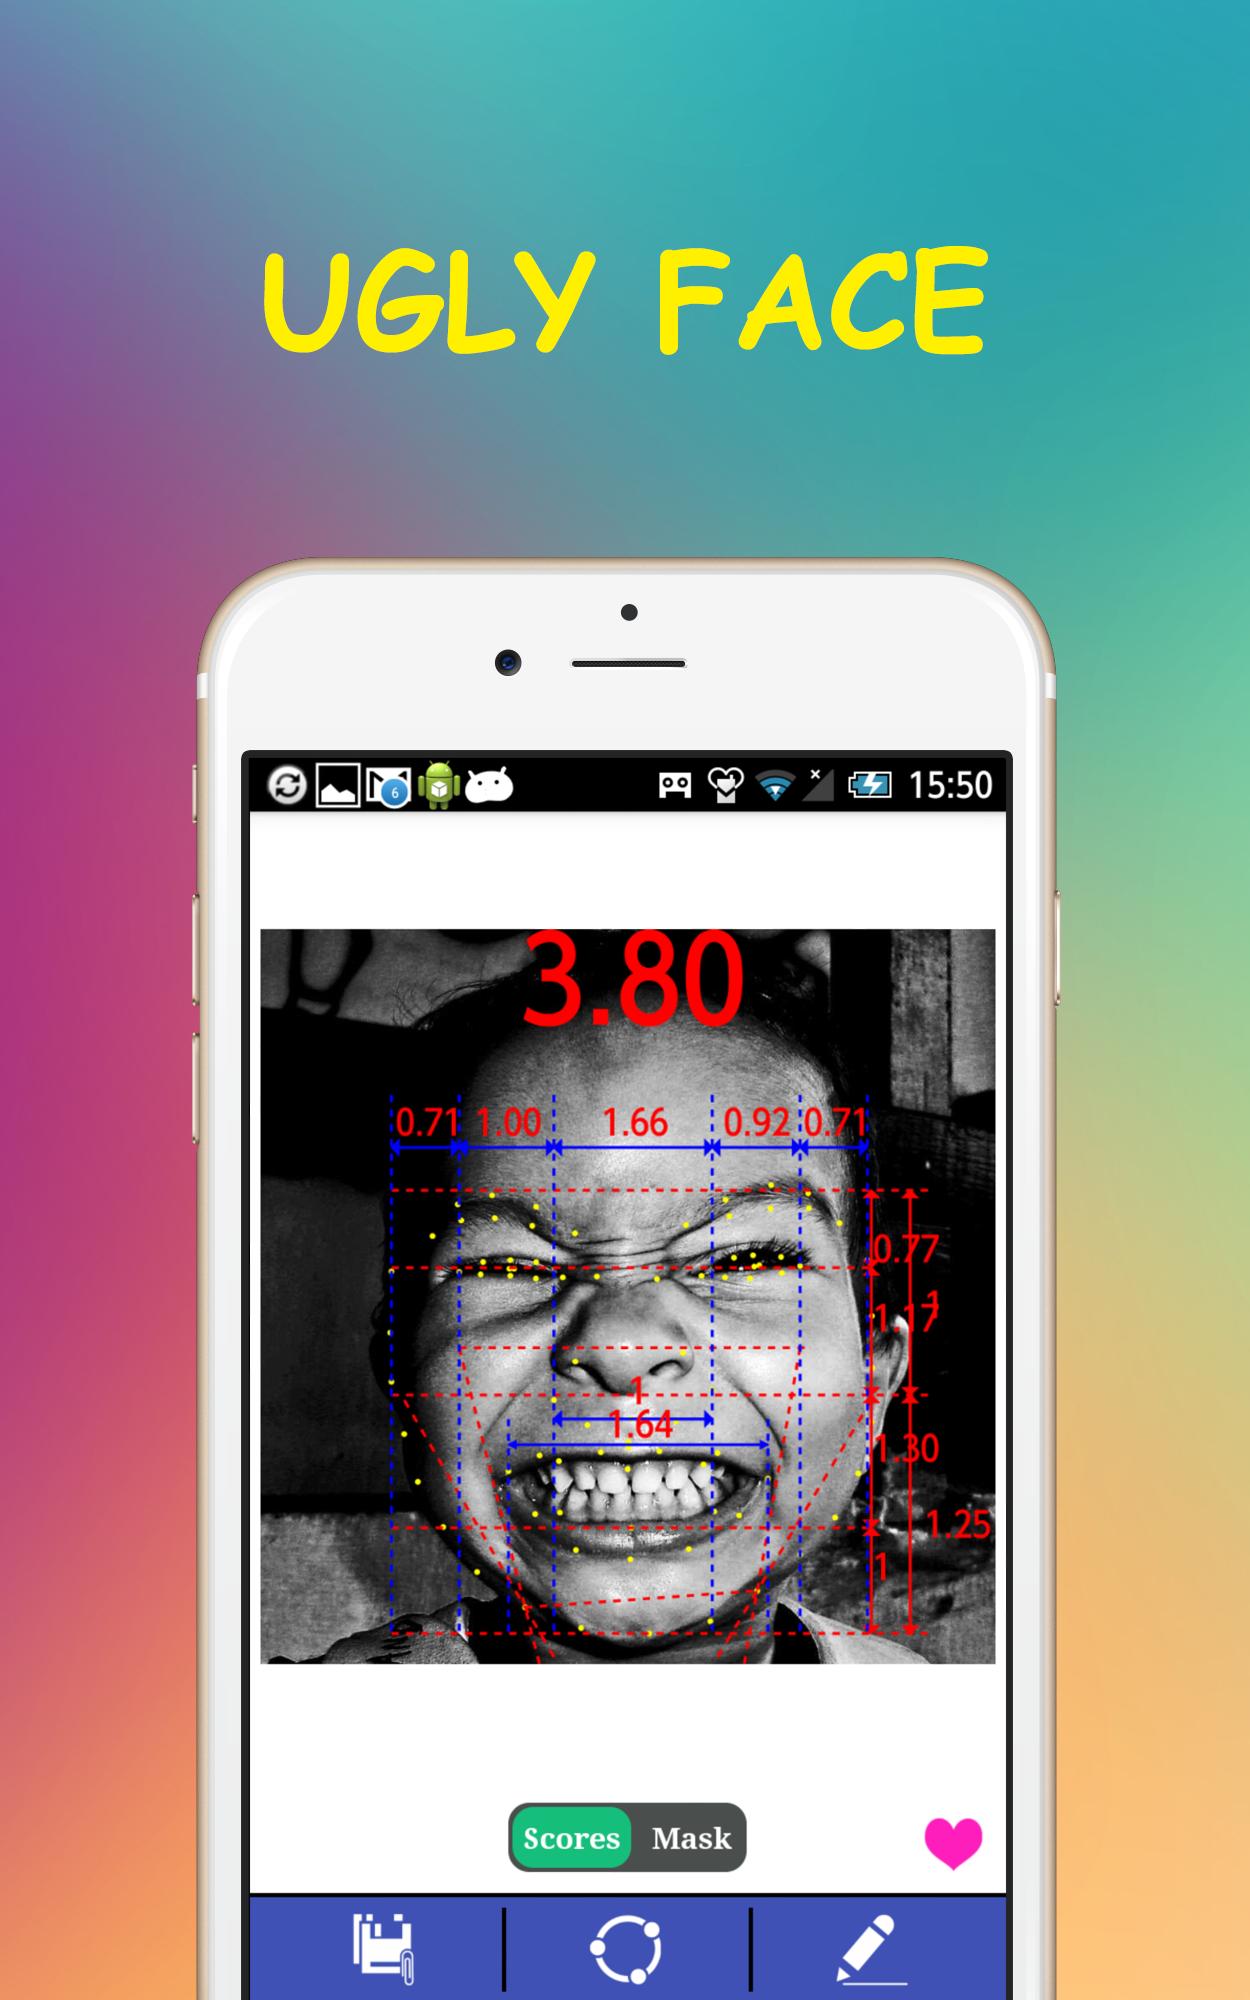 GRFace - Golden Ratio Face for Android - APK Download